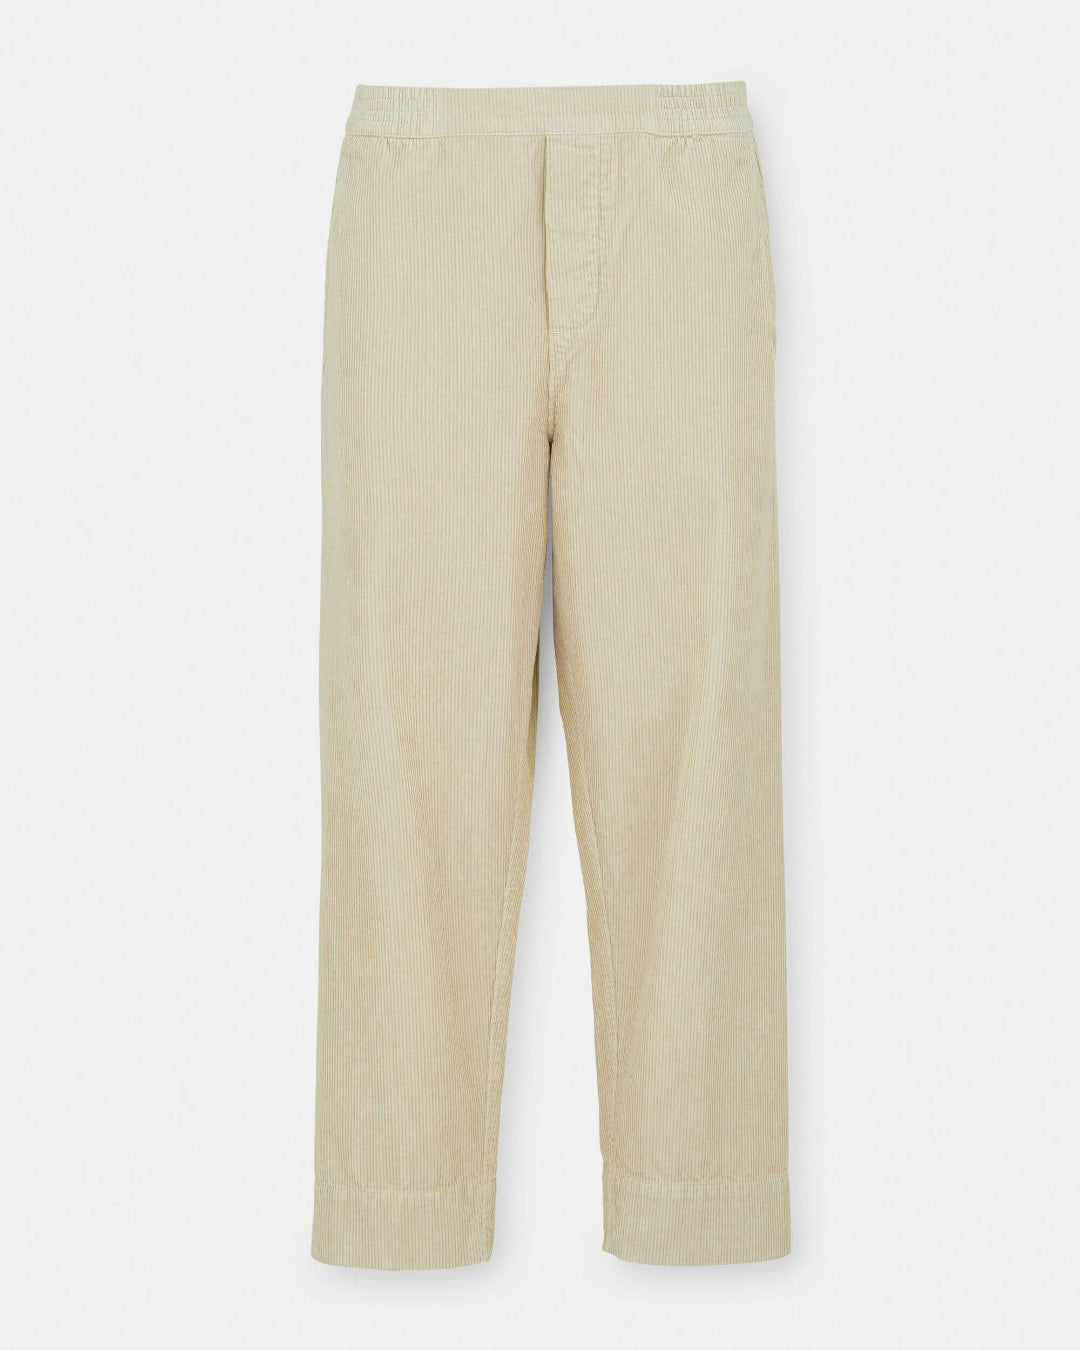 Coco Pant Corduroy | Fossil